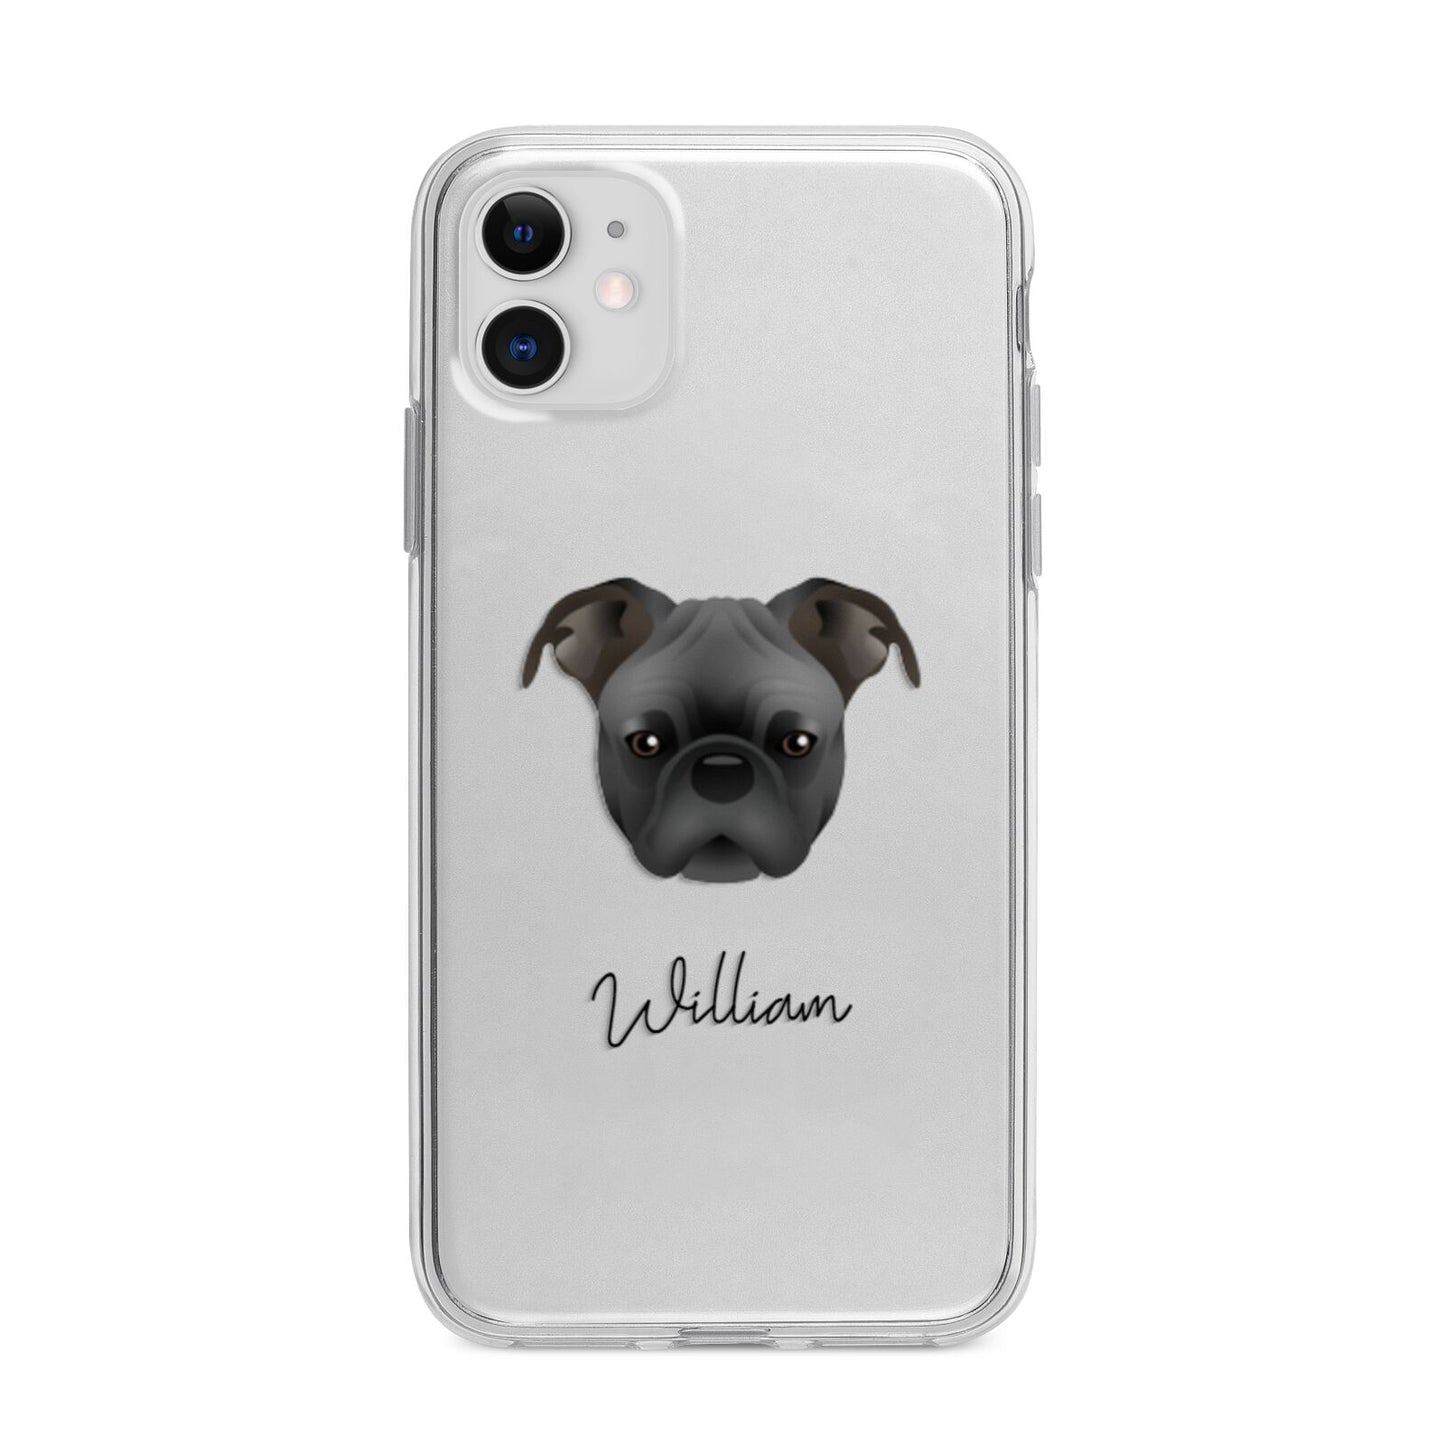 Bugg Personalised Apple iPhone 11 in White with Bumper Case